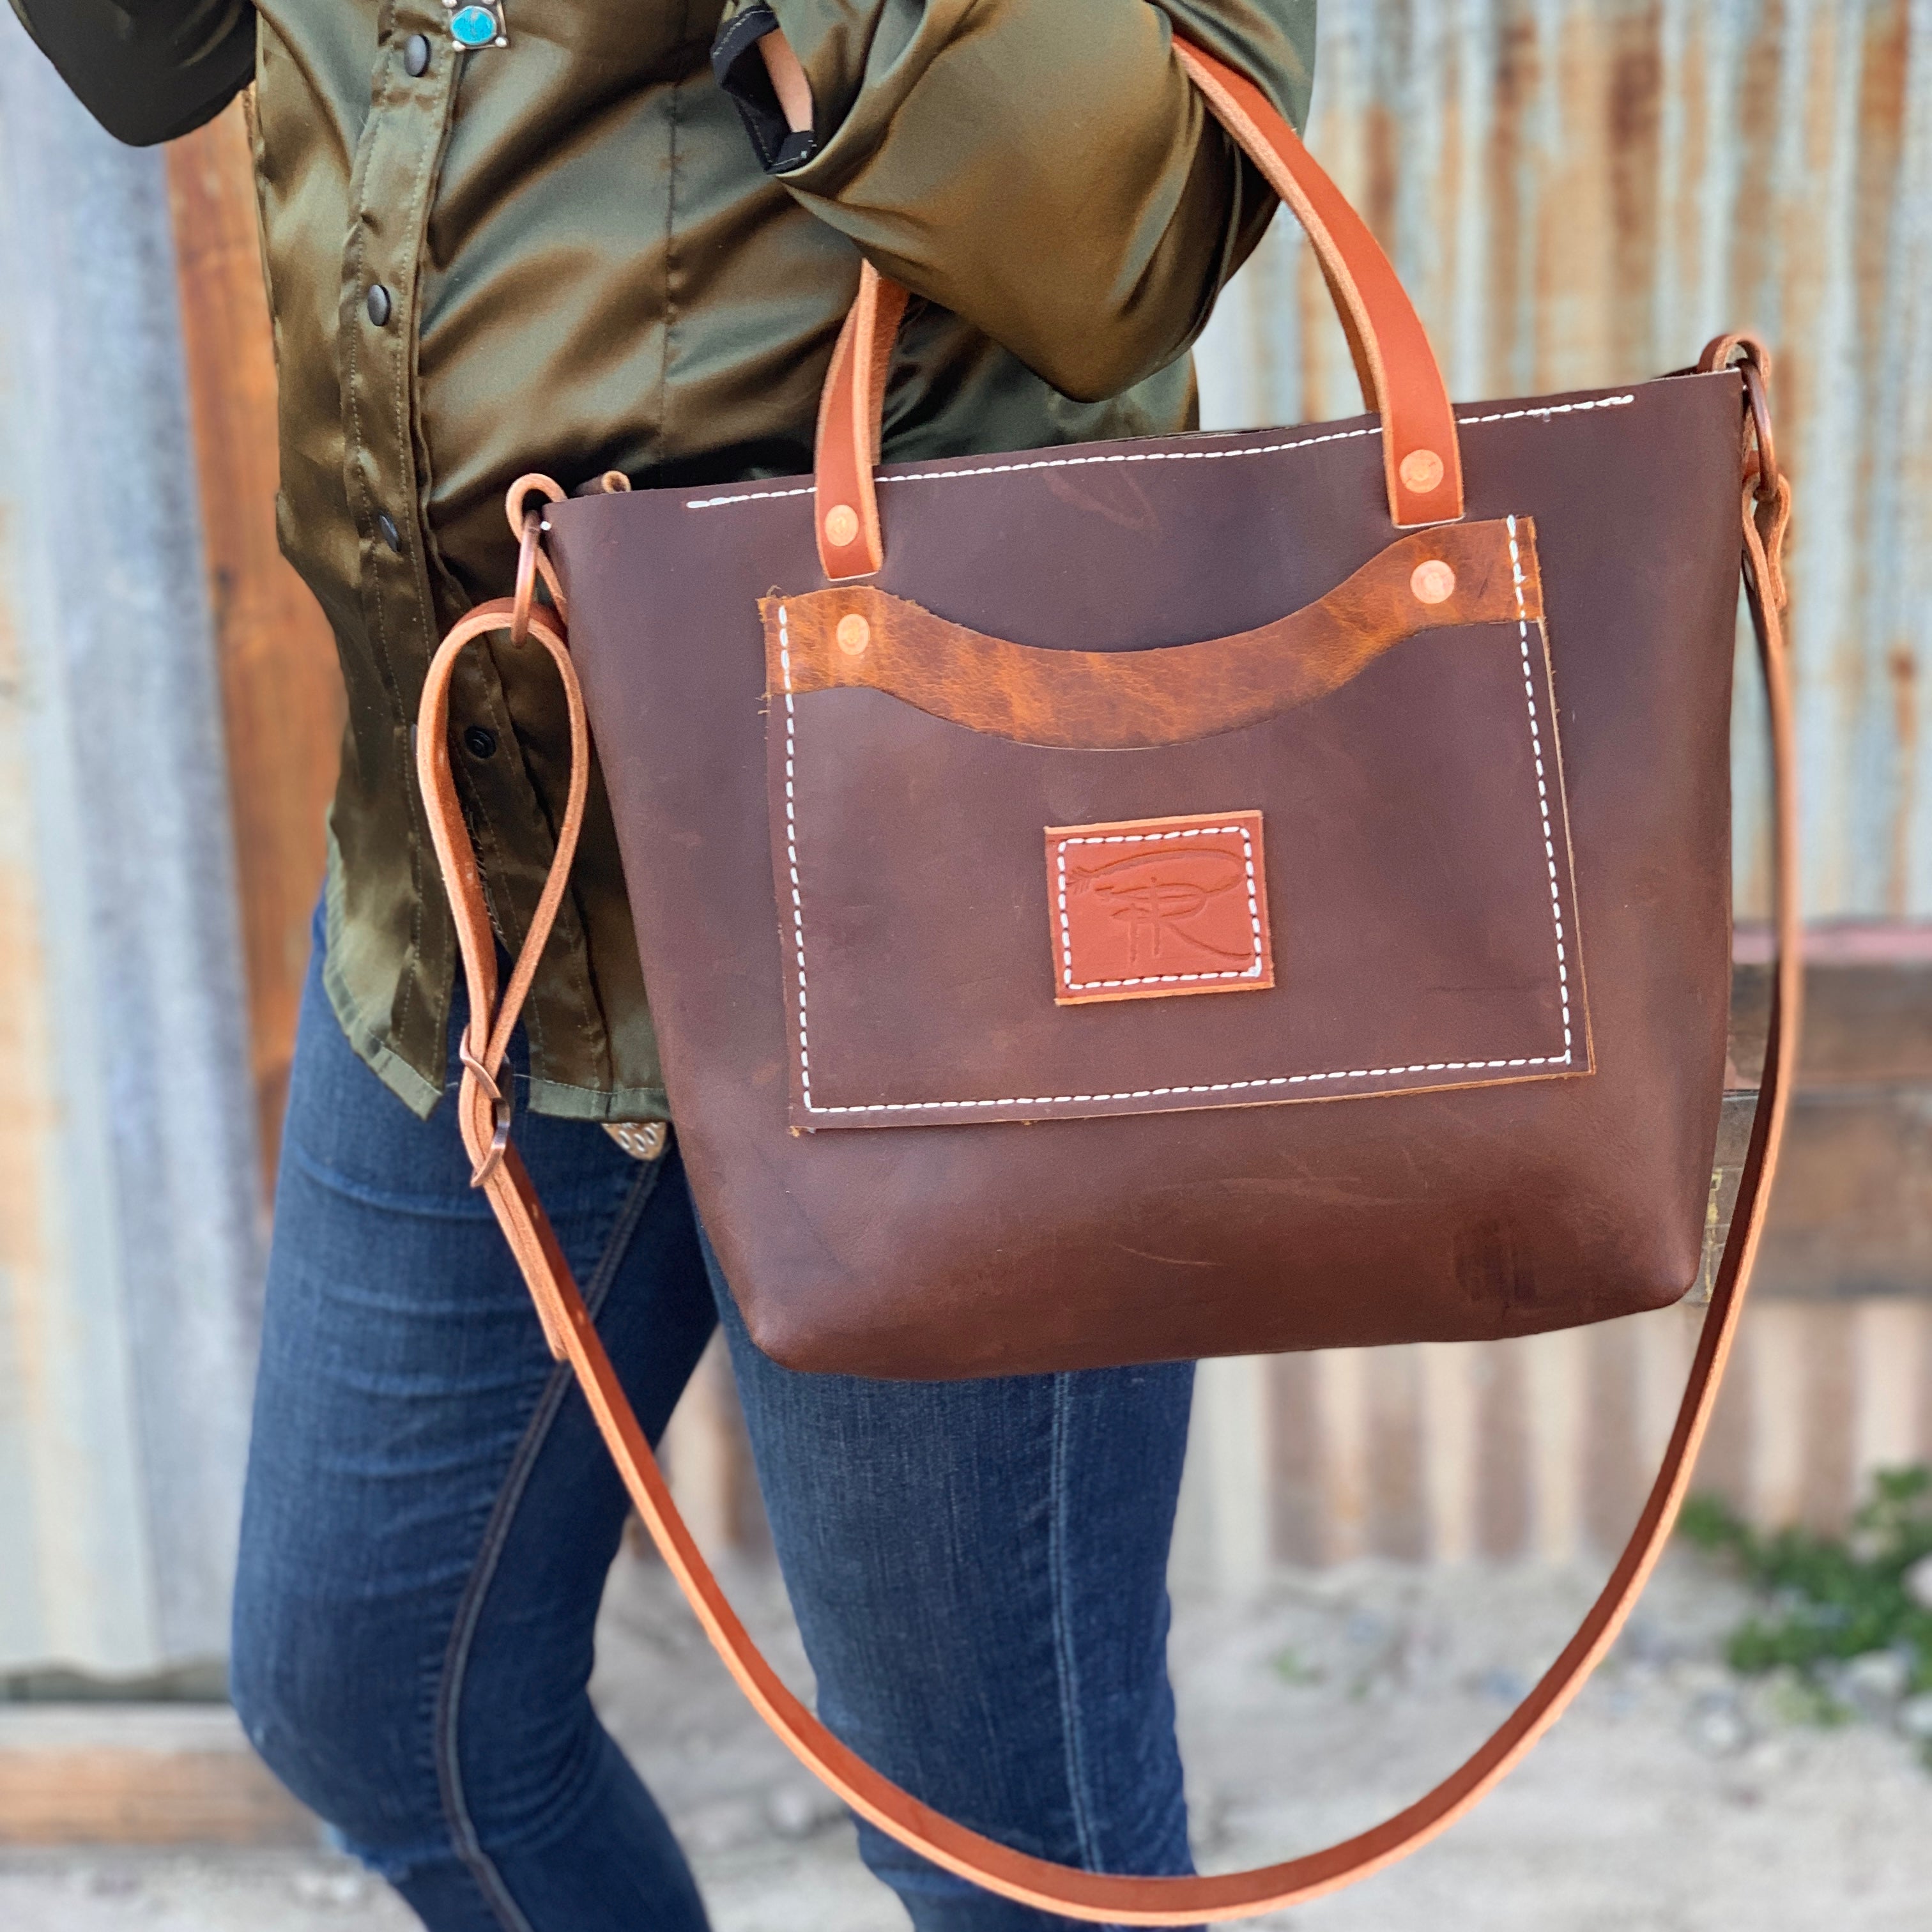 brown leather purse, handbags, panhandle red, leather goods, crossbody purse coeur d'alene idaho top gifts shop ideas leather accessories